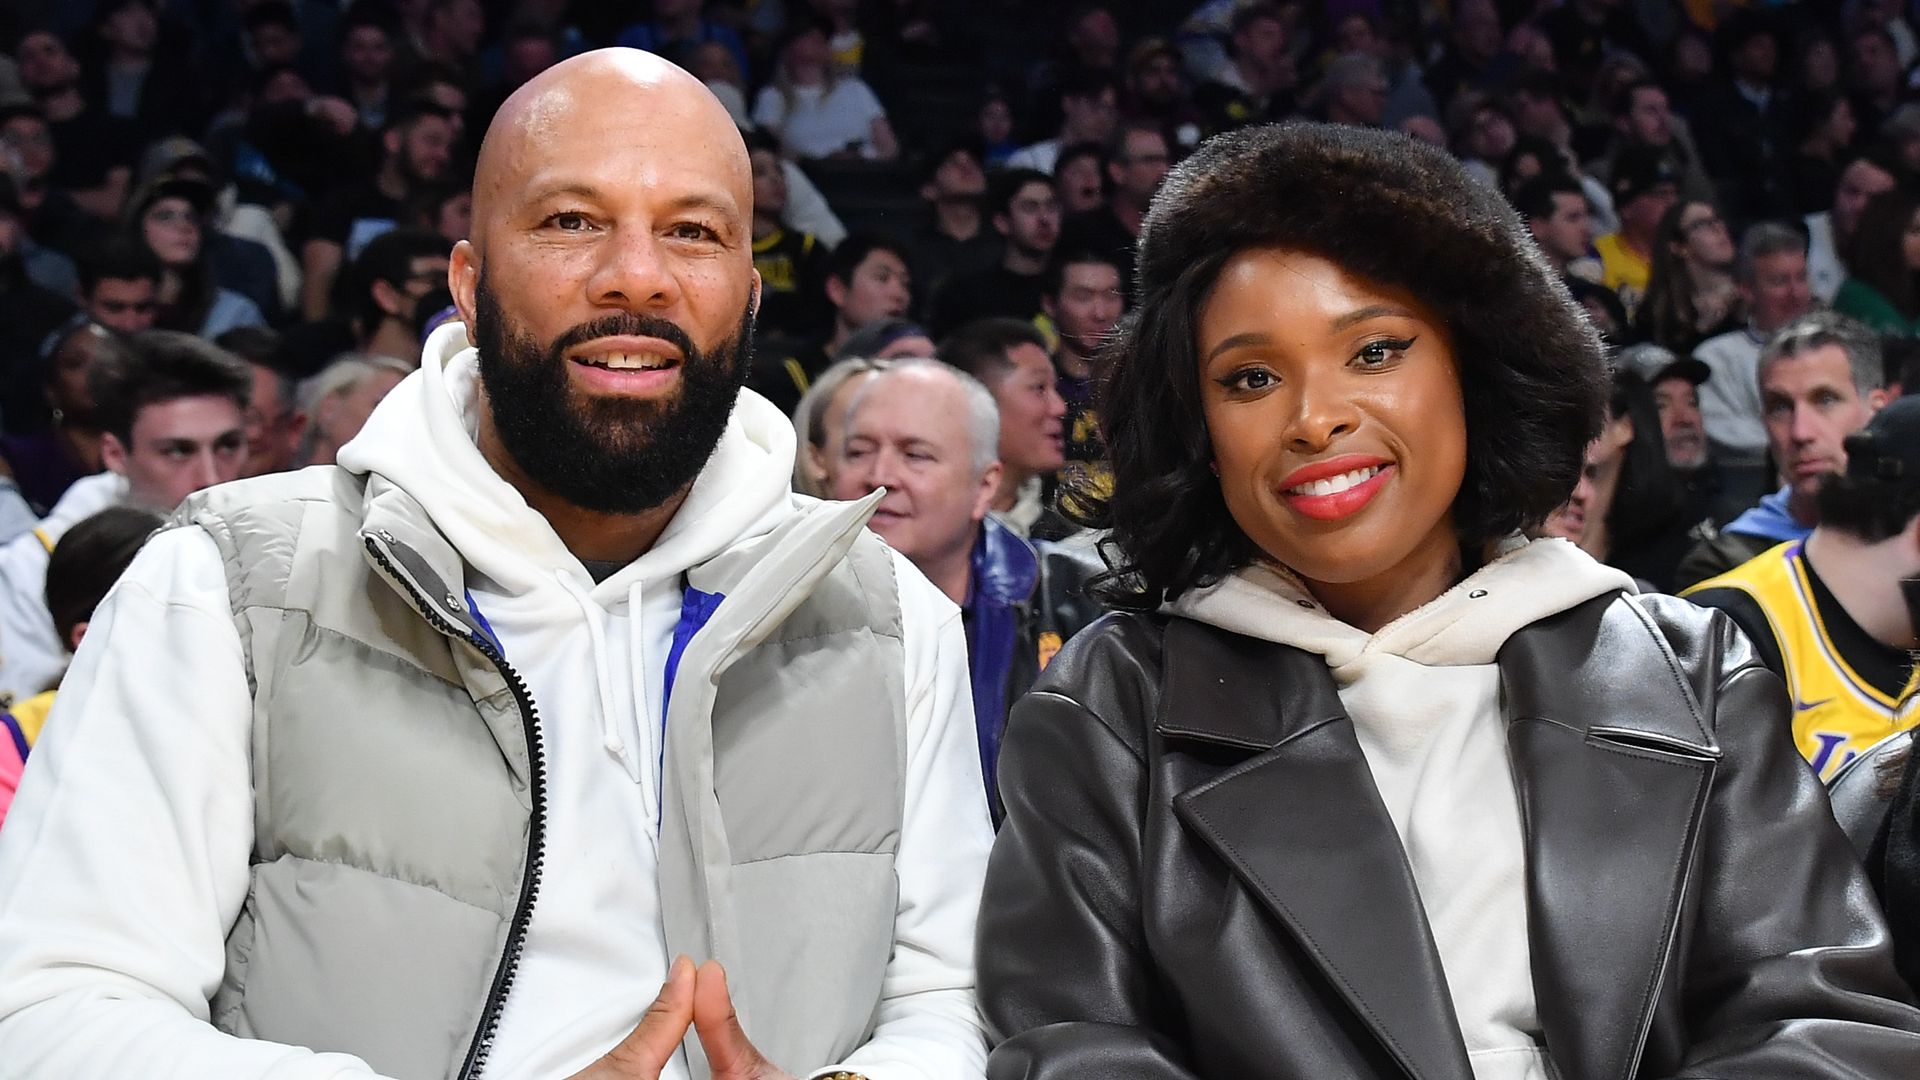 Jennifer Hudson celebrates new milestone with boyfriend Common in latest update – and fans 'can't wait'